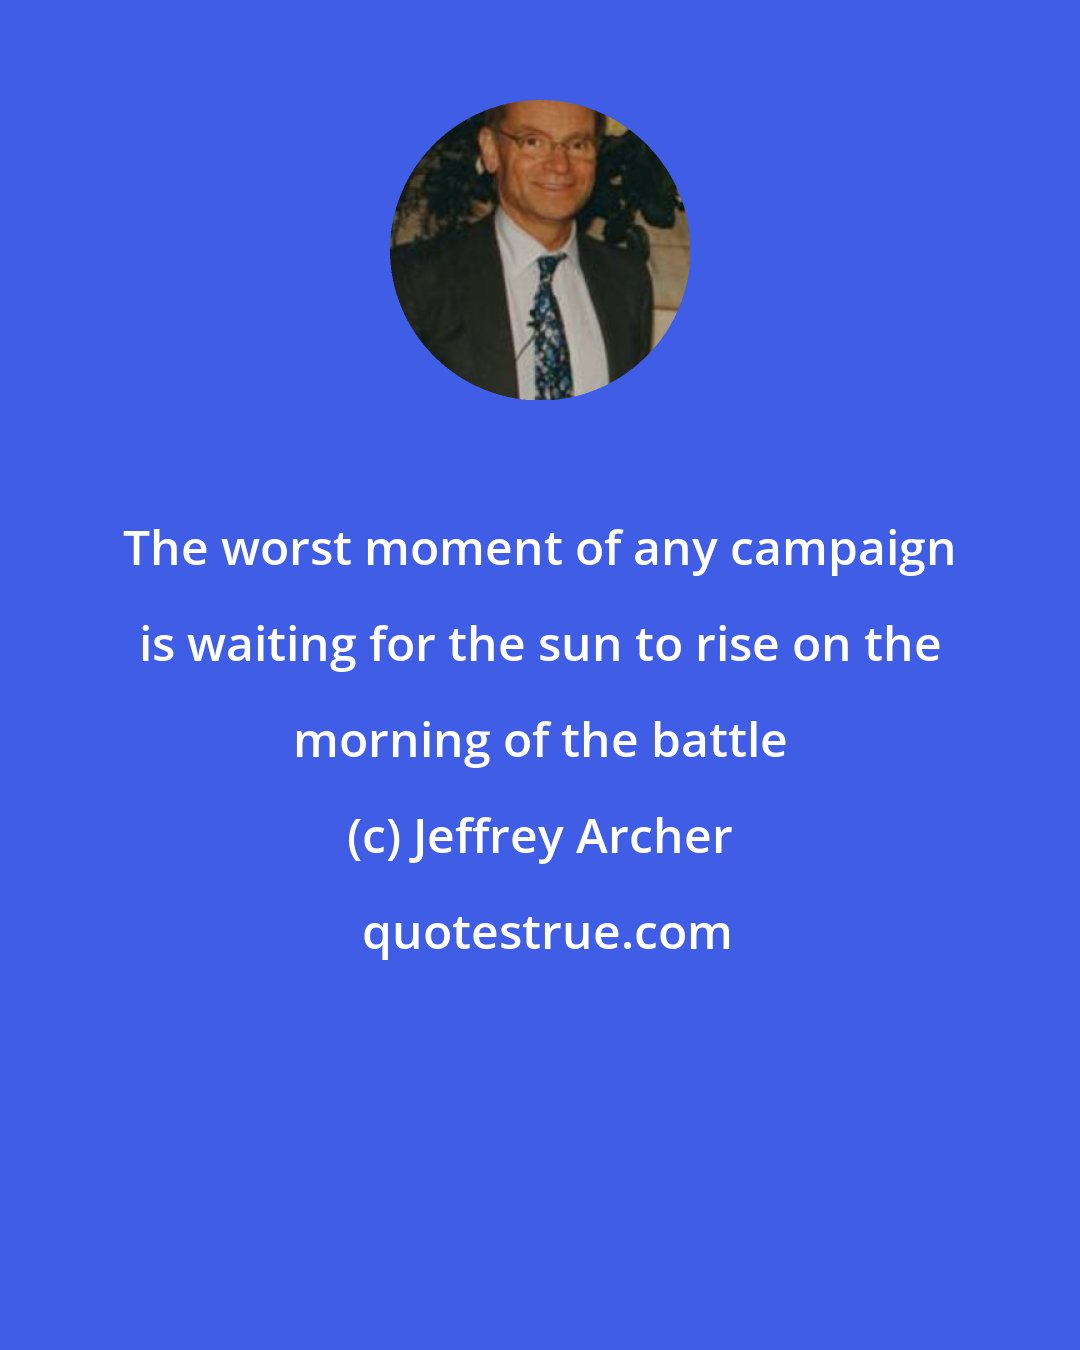 Jeffrey Archer: The worst moment of any campaign is waiting for the sun to rise on the morning of the battle